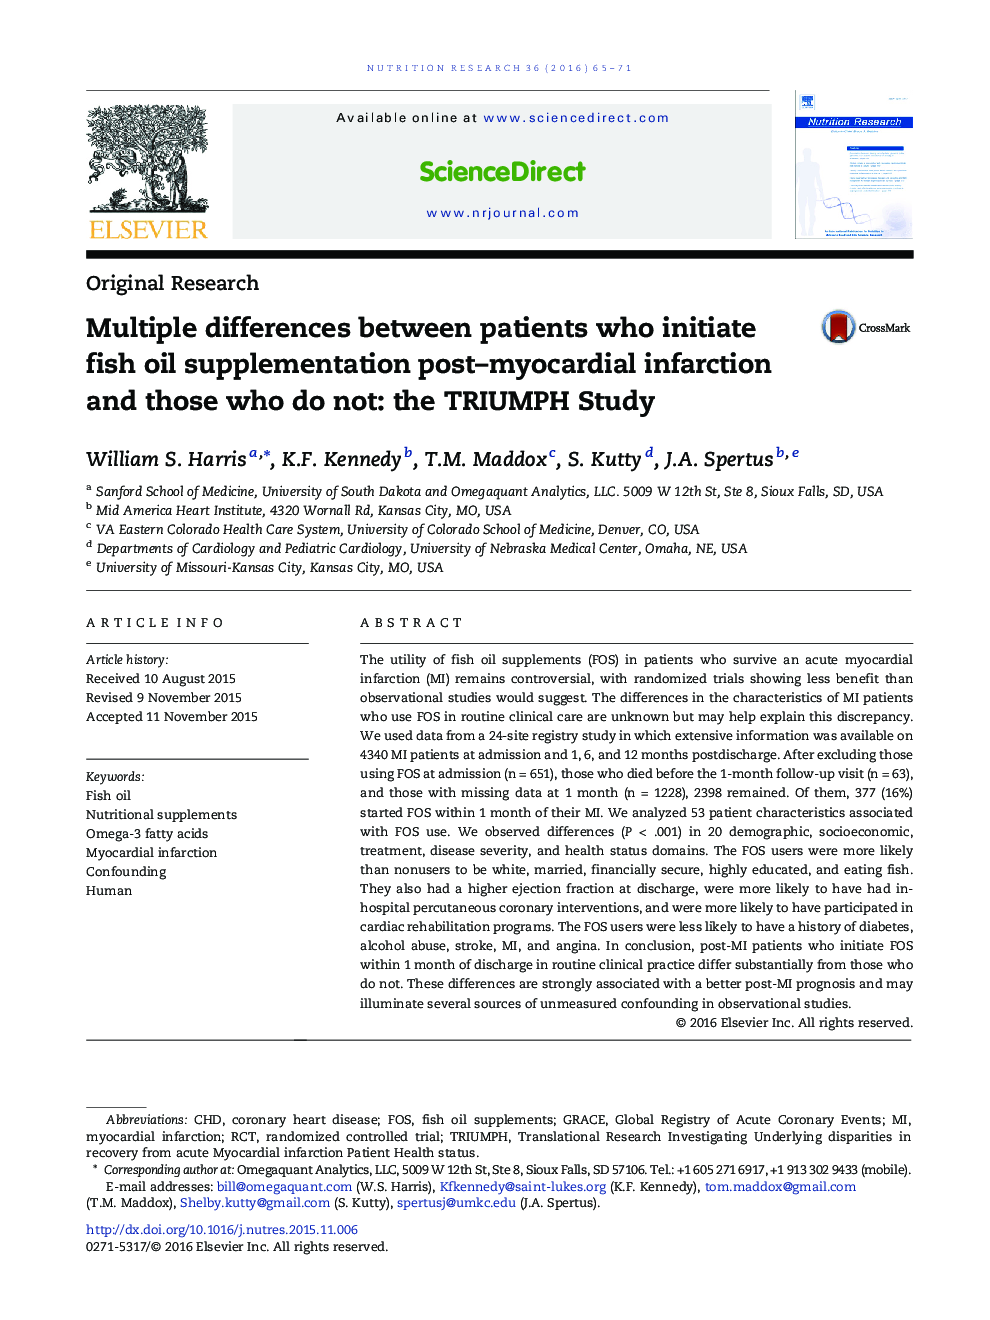 Multiple differences between patients who initiate fish oil supplementation post–myocardial infarction and those who do not: the TRIUMPH Study